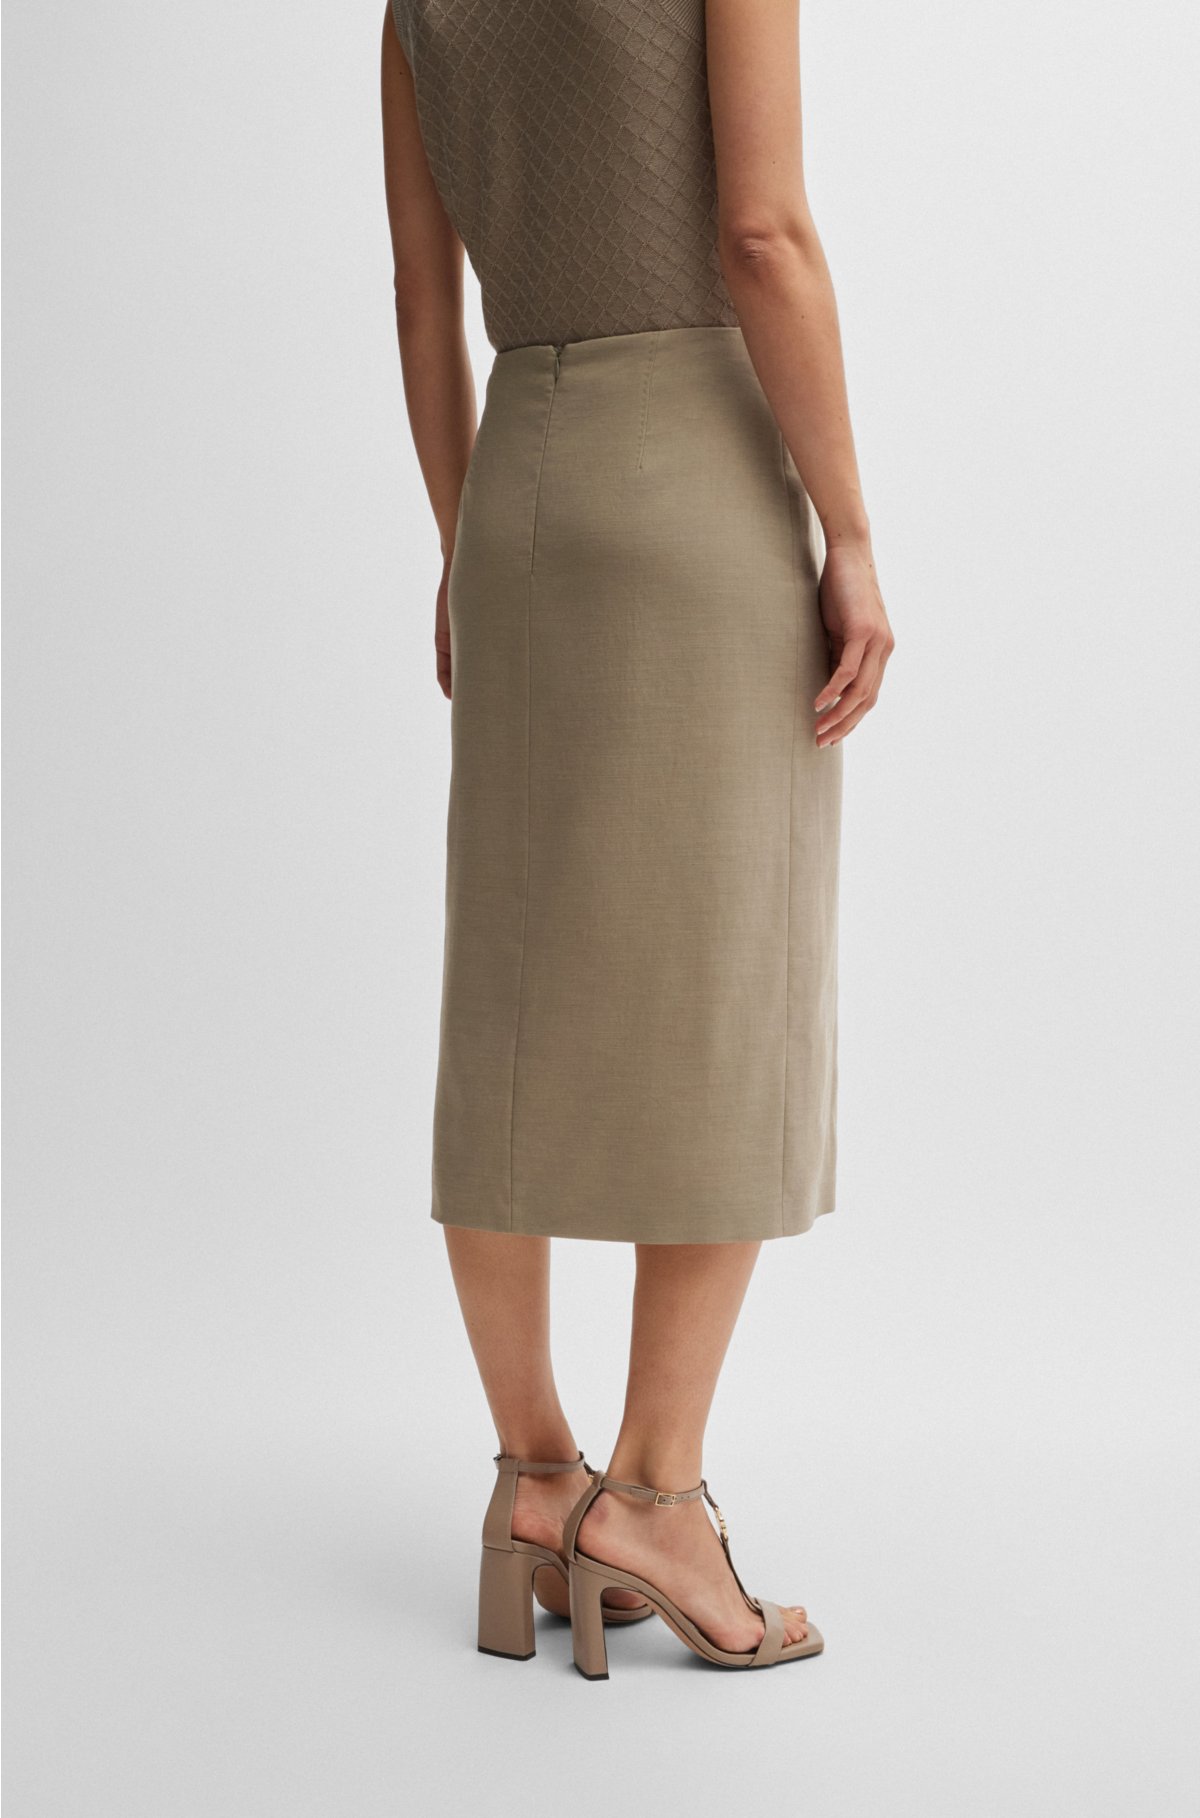 Pencil skirt in wool, linen and stretch, Light Brown